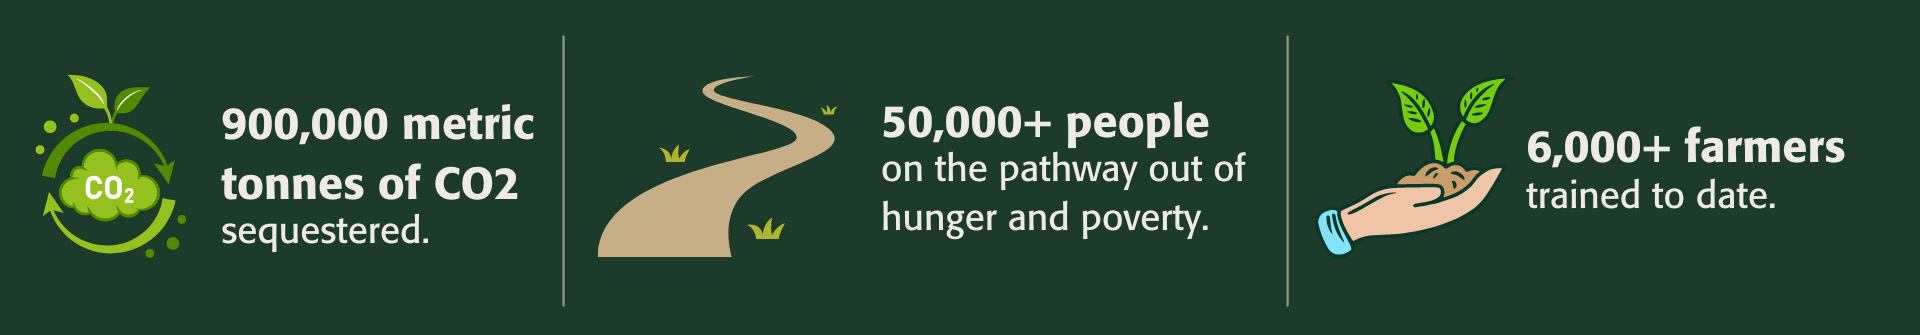 Infographic: 900,000 metric tonnes of CO2 sequestered, 50,000+ people on the pathway out of hunger and poverty, 6,000+ farmers trained to date.